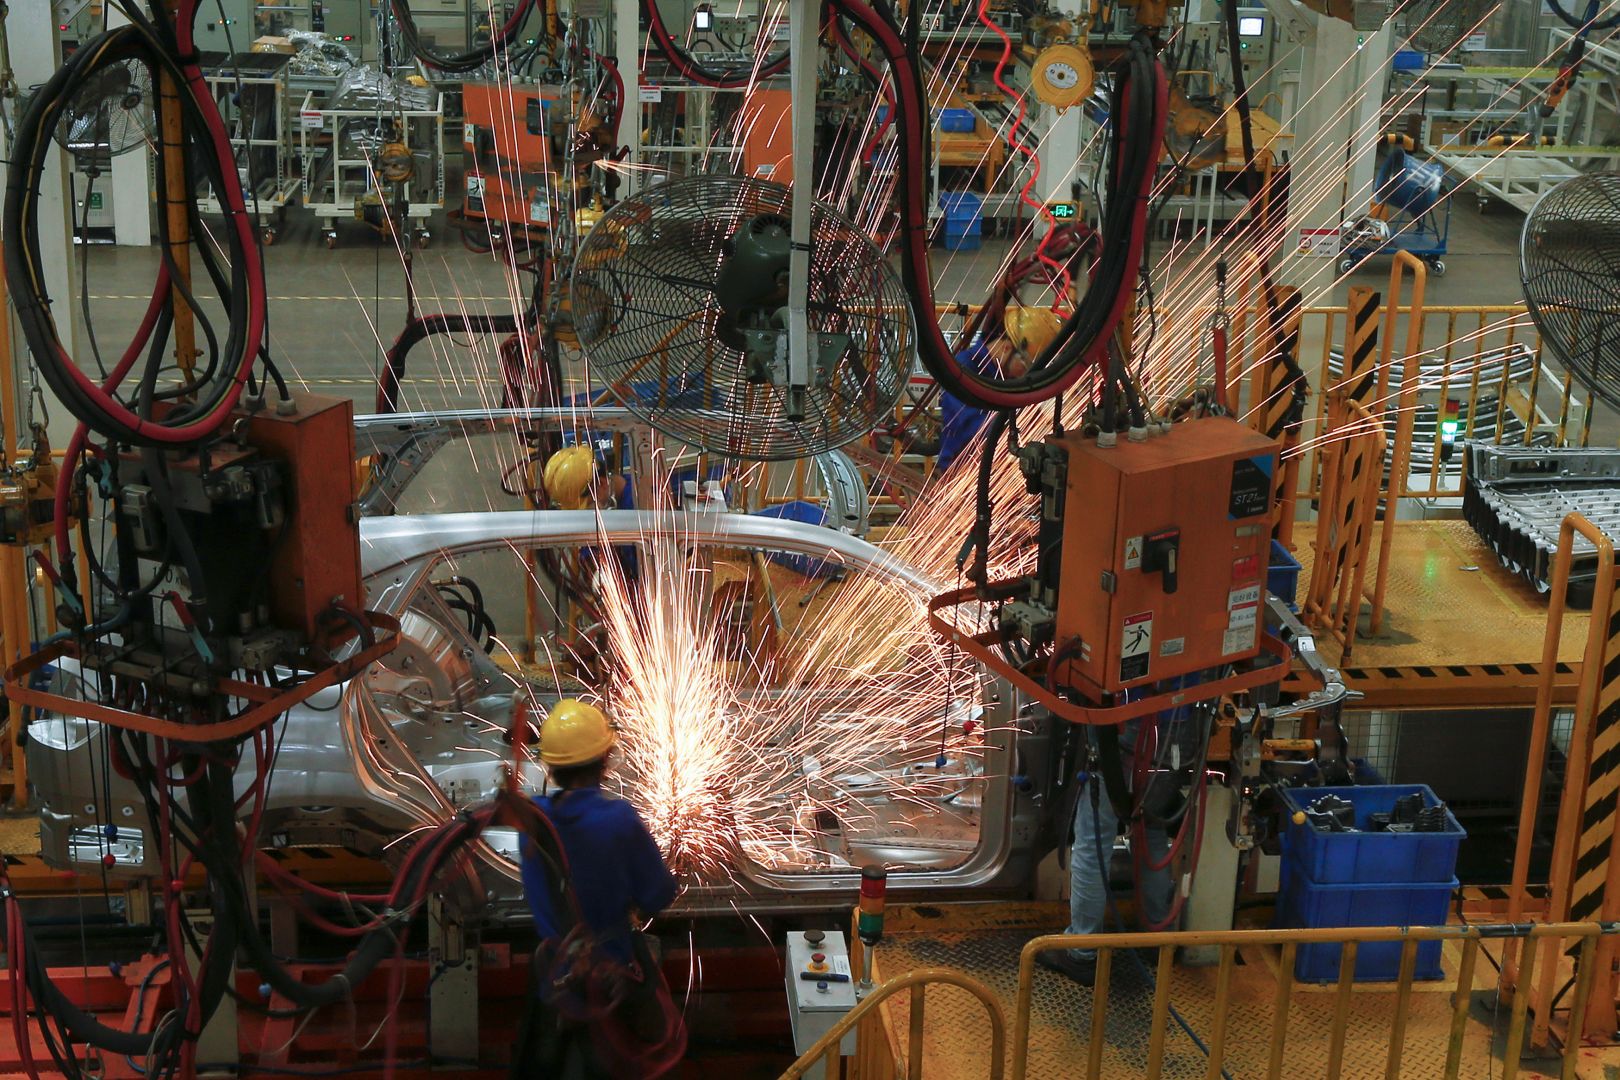 China factory activity expands again in September: official PMI